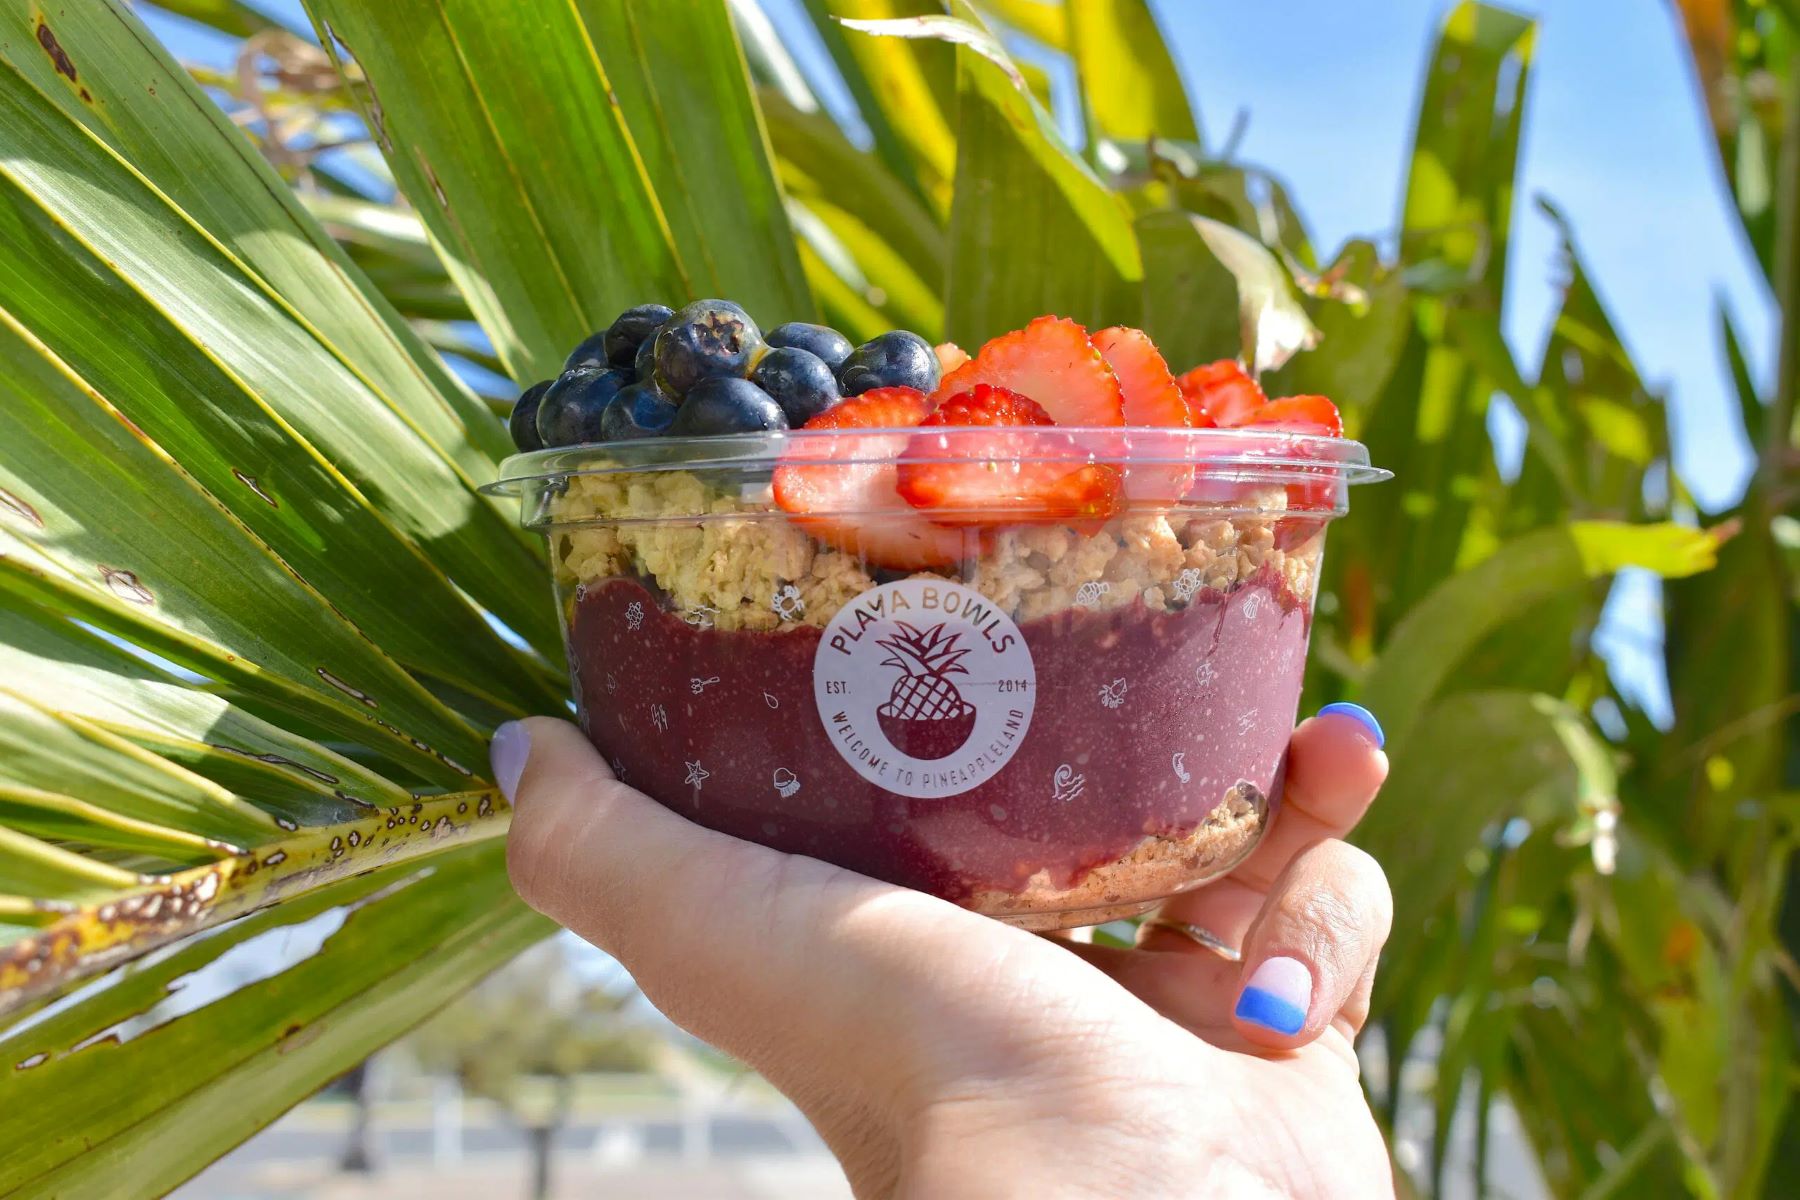 20-playa-bowls-nutrition-facts